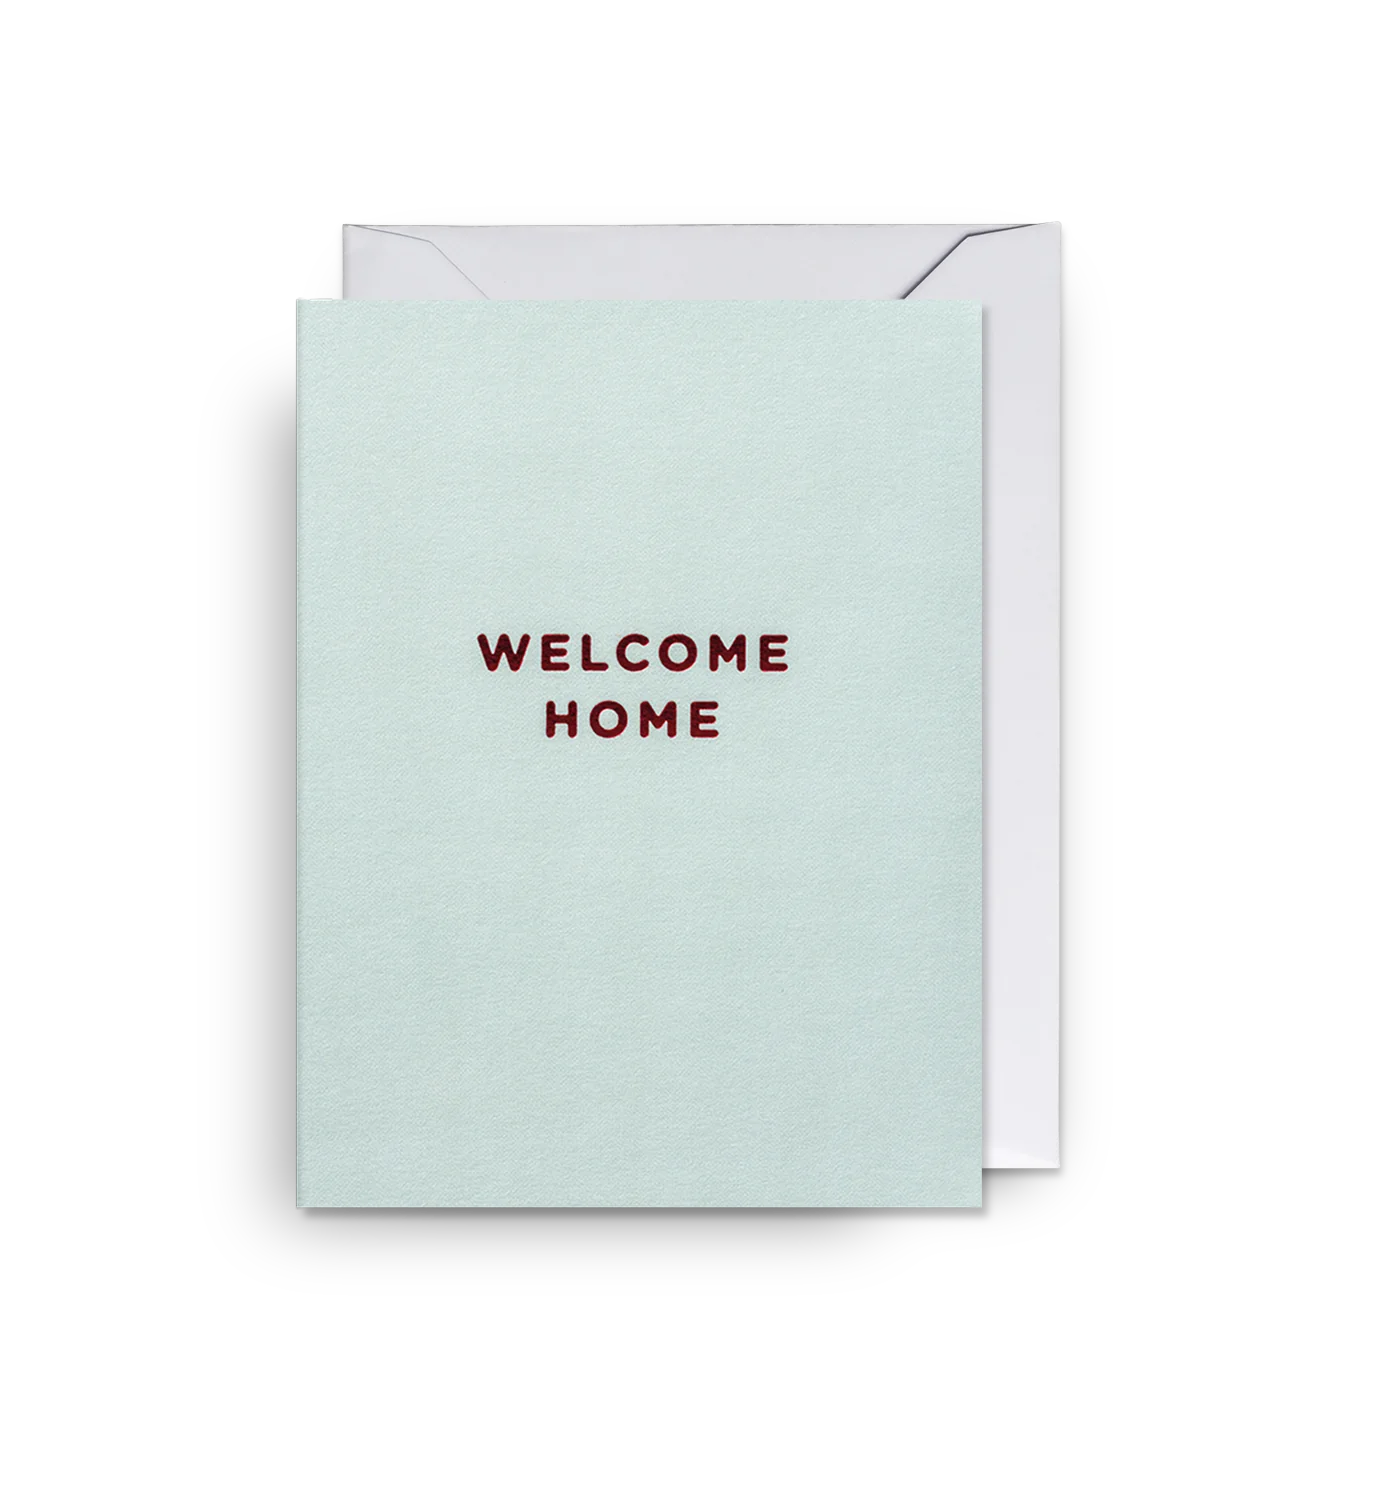 Fabulous Greeting Cards Mini Card Welcome Home by Weirs of Baggot Street